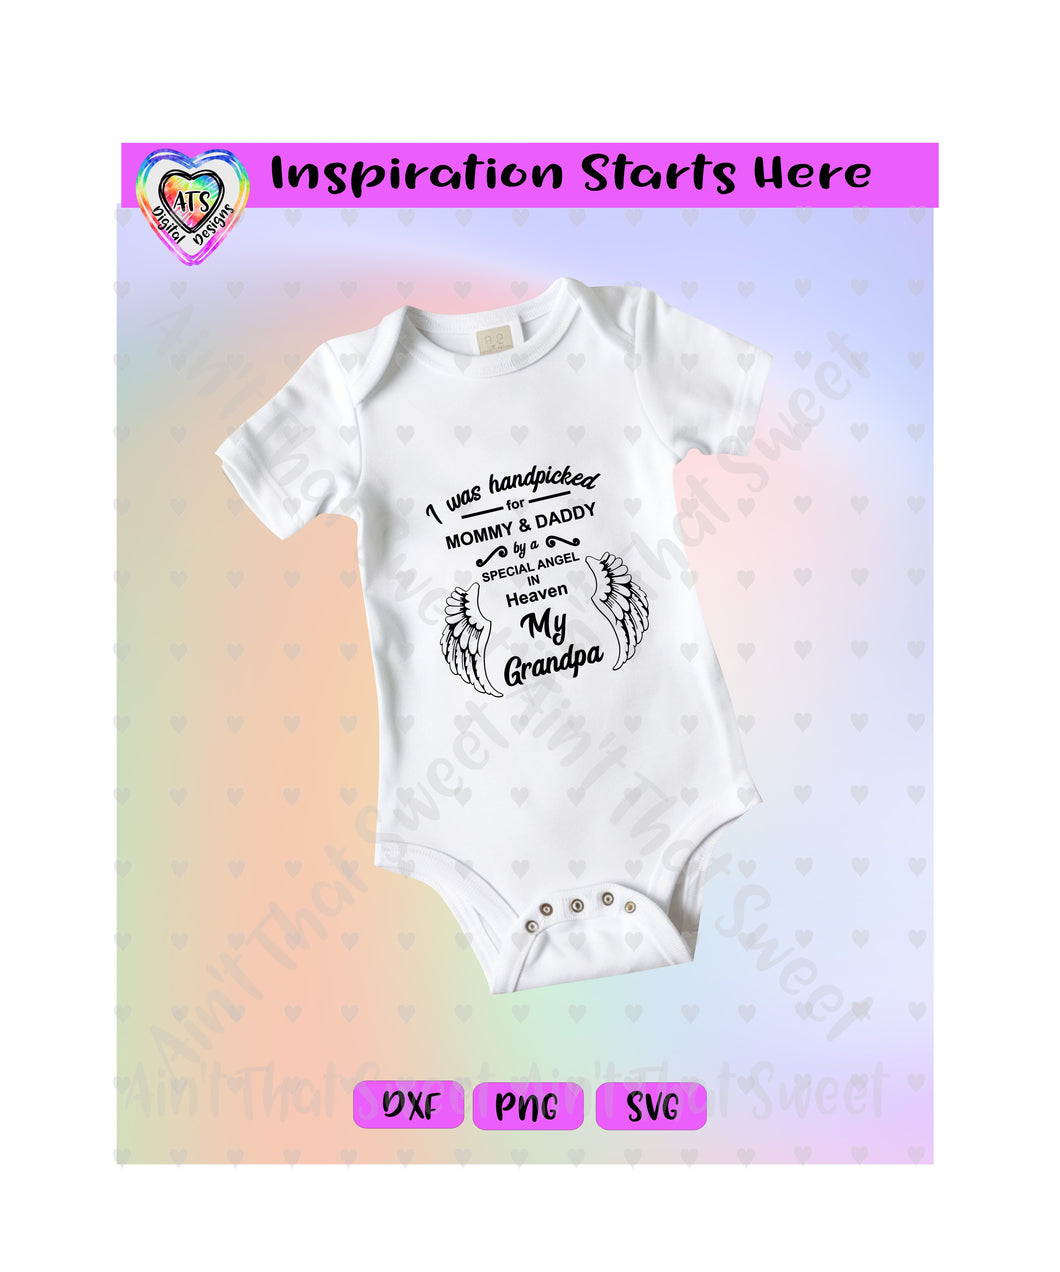 I Was Handpicked For Mommy & Daddy By A Special Angel - My Grandpa | Wings - Transparent PNG, SVG  - Silhouette, Cricut, Scan N Cut